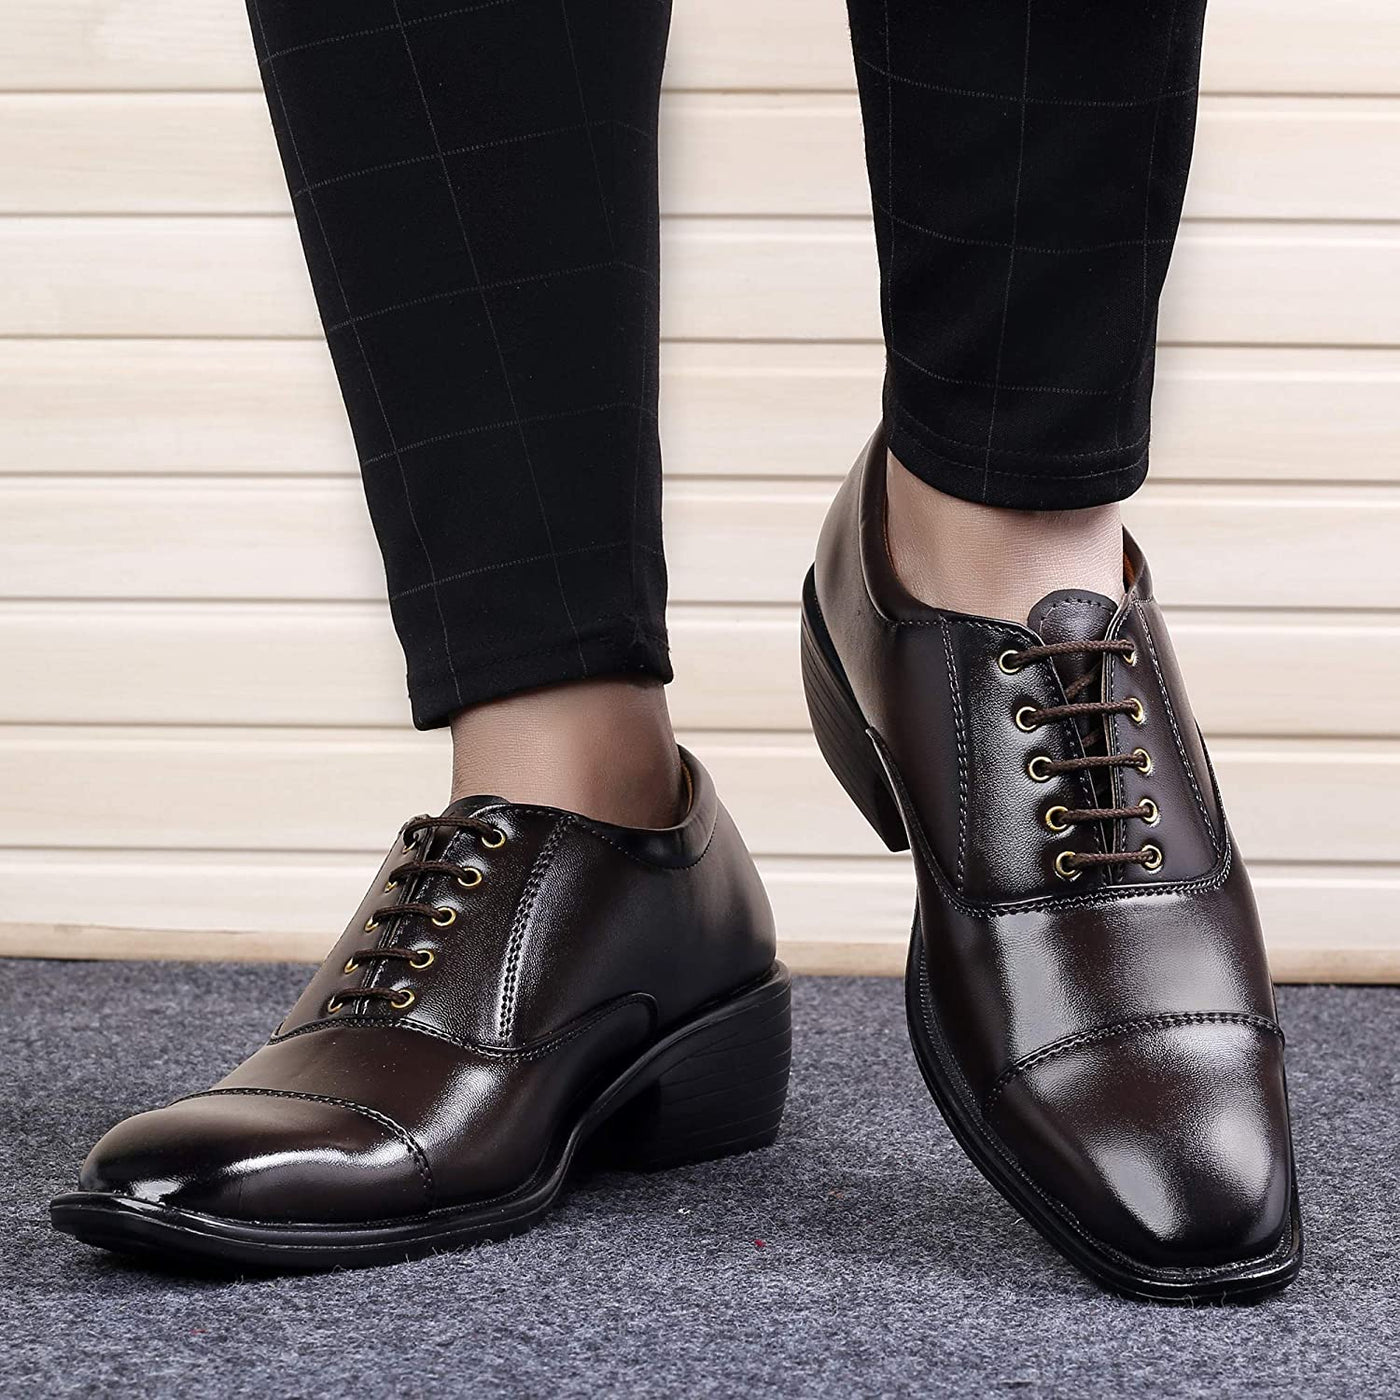 Fashionable Brown Casual And Formal Office Wear Lace-Up Shoes-Unique and Classy